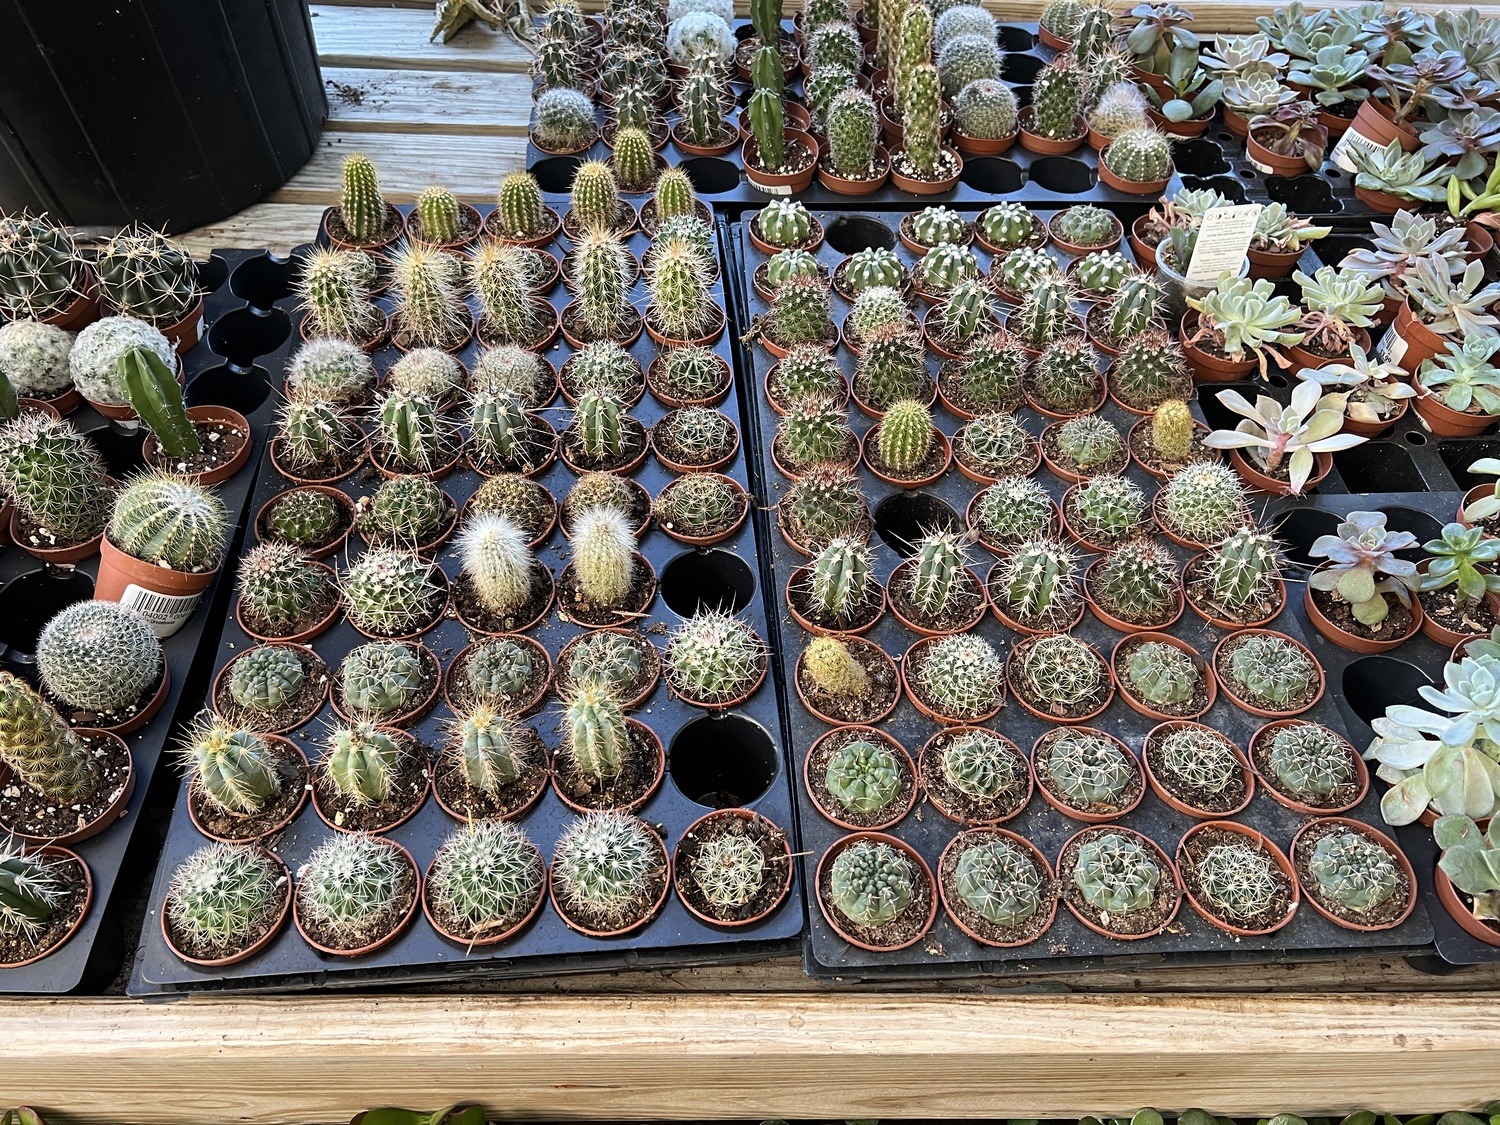 A great way to start a plant collection, in this case cacti, is to buy them when they are small and in small pots. These are in 2.5-inch pots, and soon they’ll be ready for larger pots. They look small now but under the right growing conditions all of them will get quite large and yes, with the right light they will also flower.
ANDREW MESSINGER